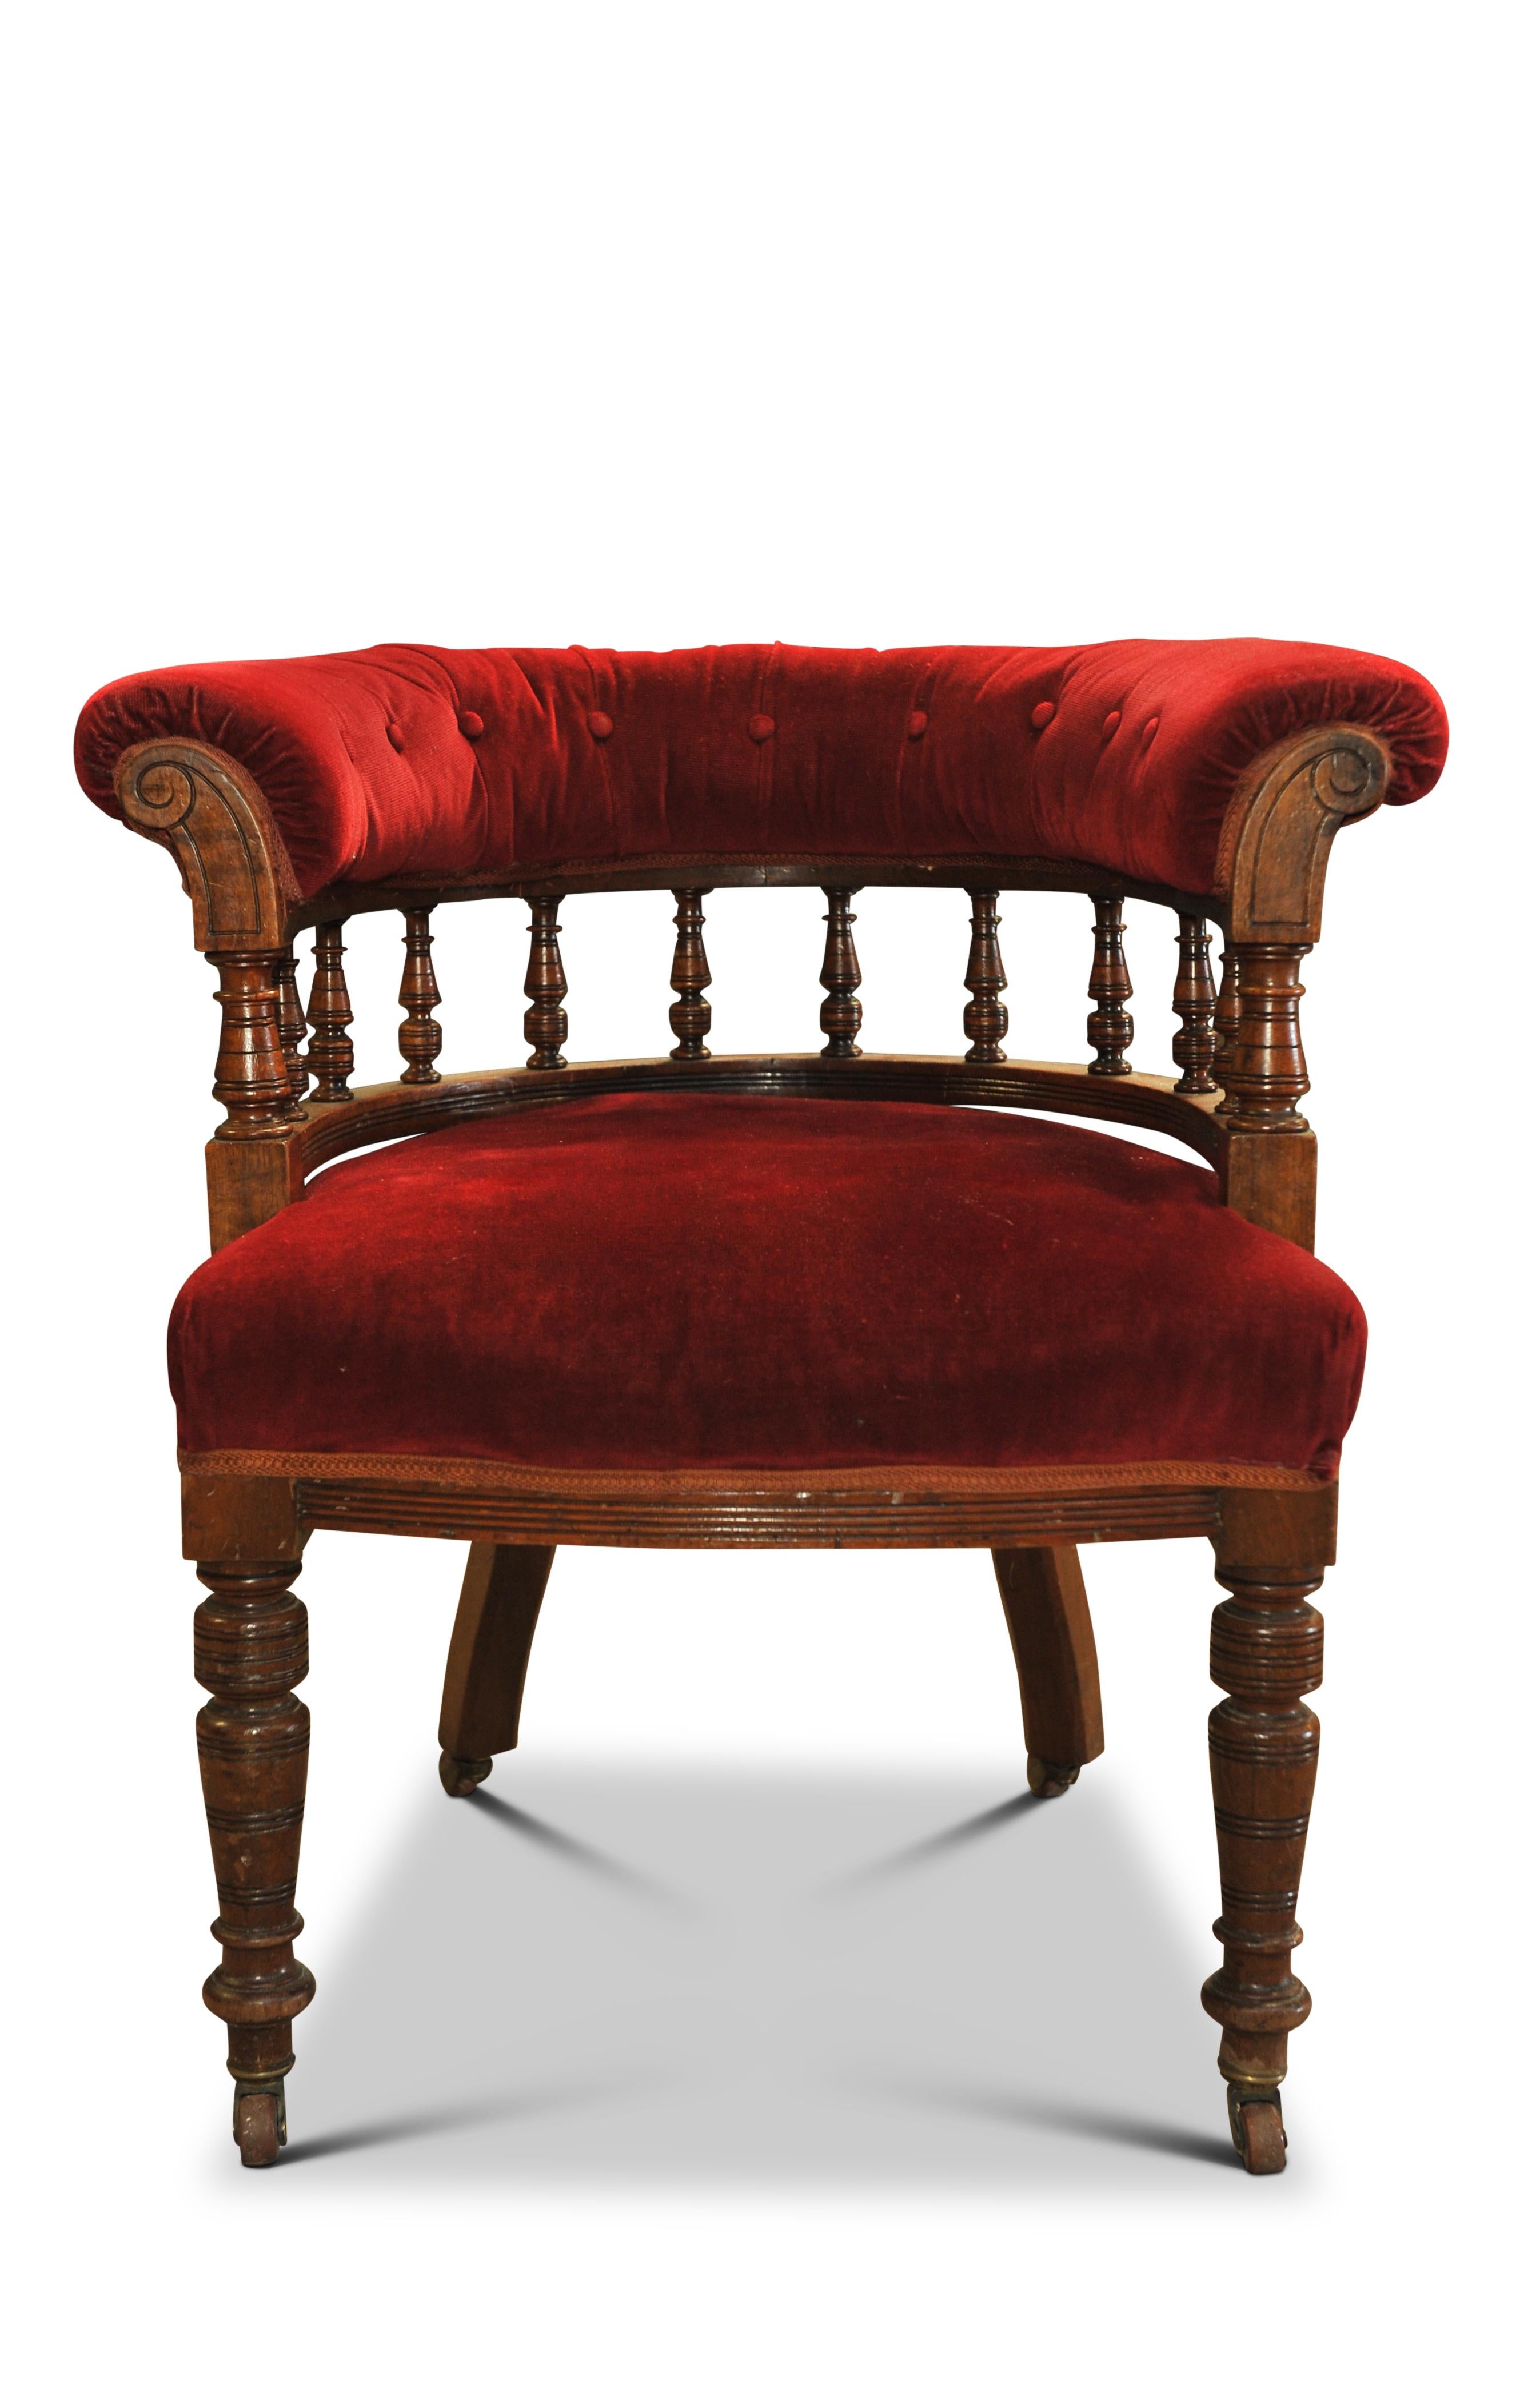 19th Century Red Velvet Chesterfield Red Velvet Buttonback Captains Chair With Porcelain Castors

Heavy weight hand made chair with horsehair stuffed seat. 

Extra dimensions 

Height to the top of the arms 75cm
Seat width 54cm I Seat depth 57cm 
